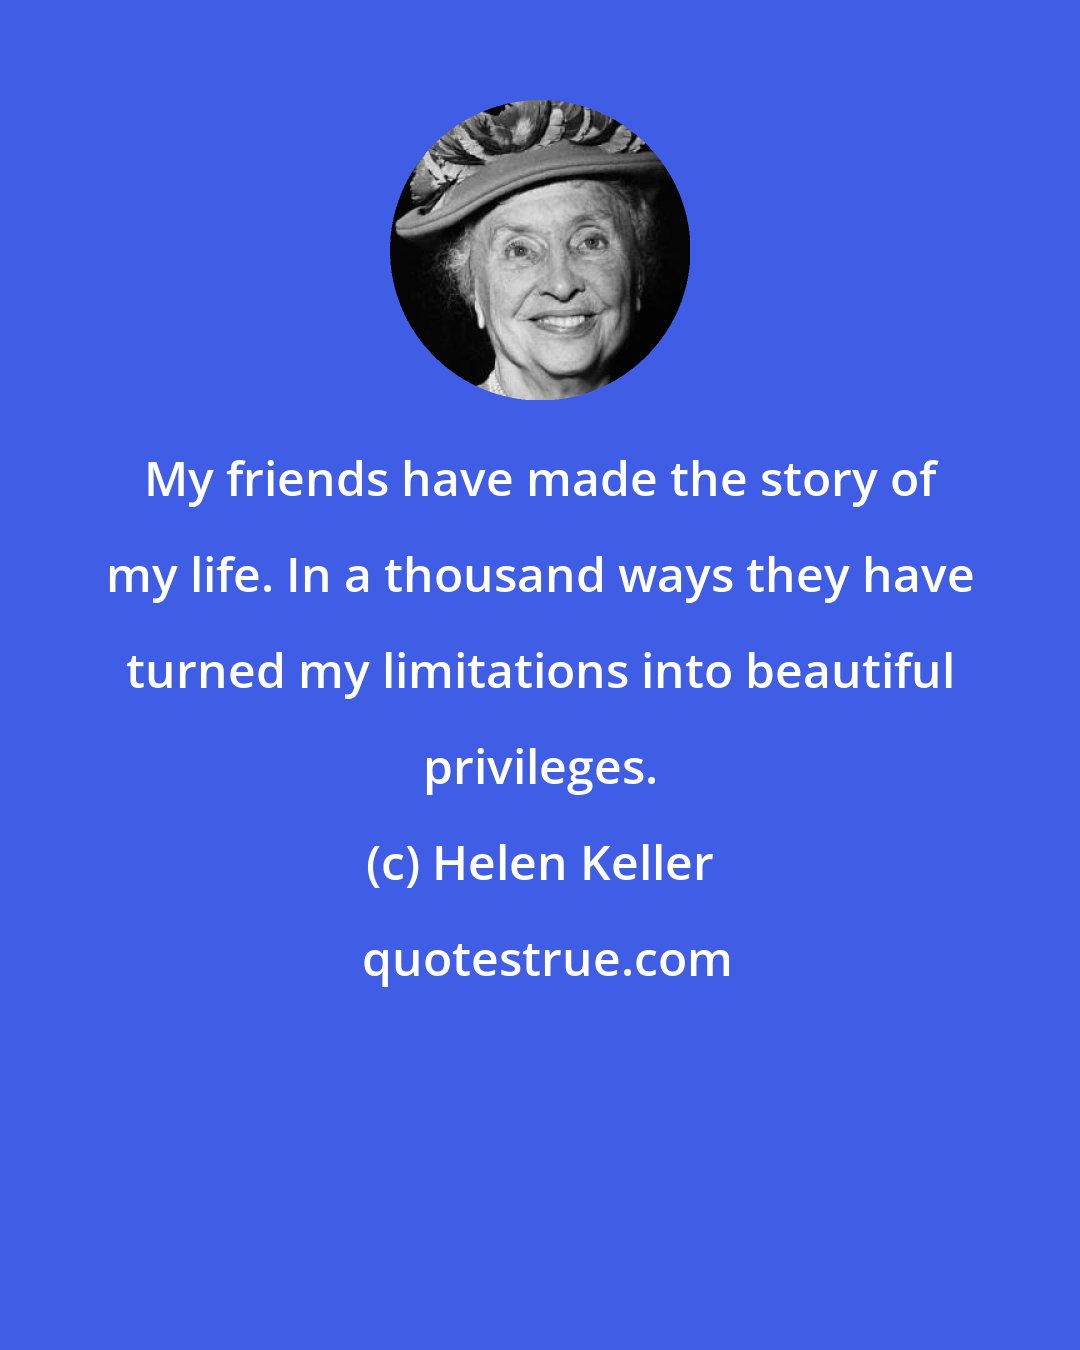 Helen Keller: My friends have made the story of my life. In a thousand ways they have turned my limitations into beautiful privileges.